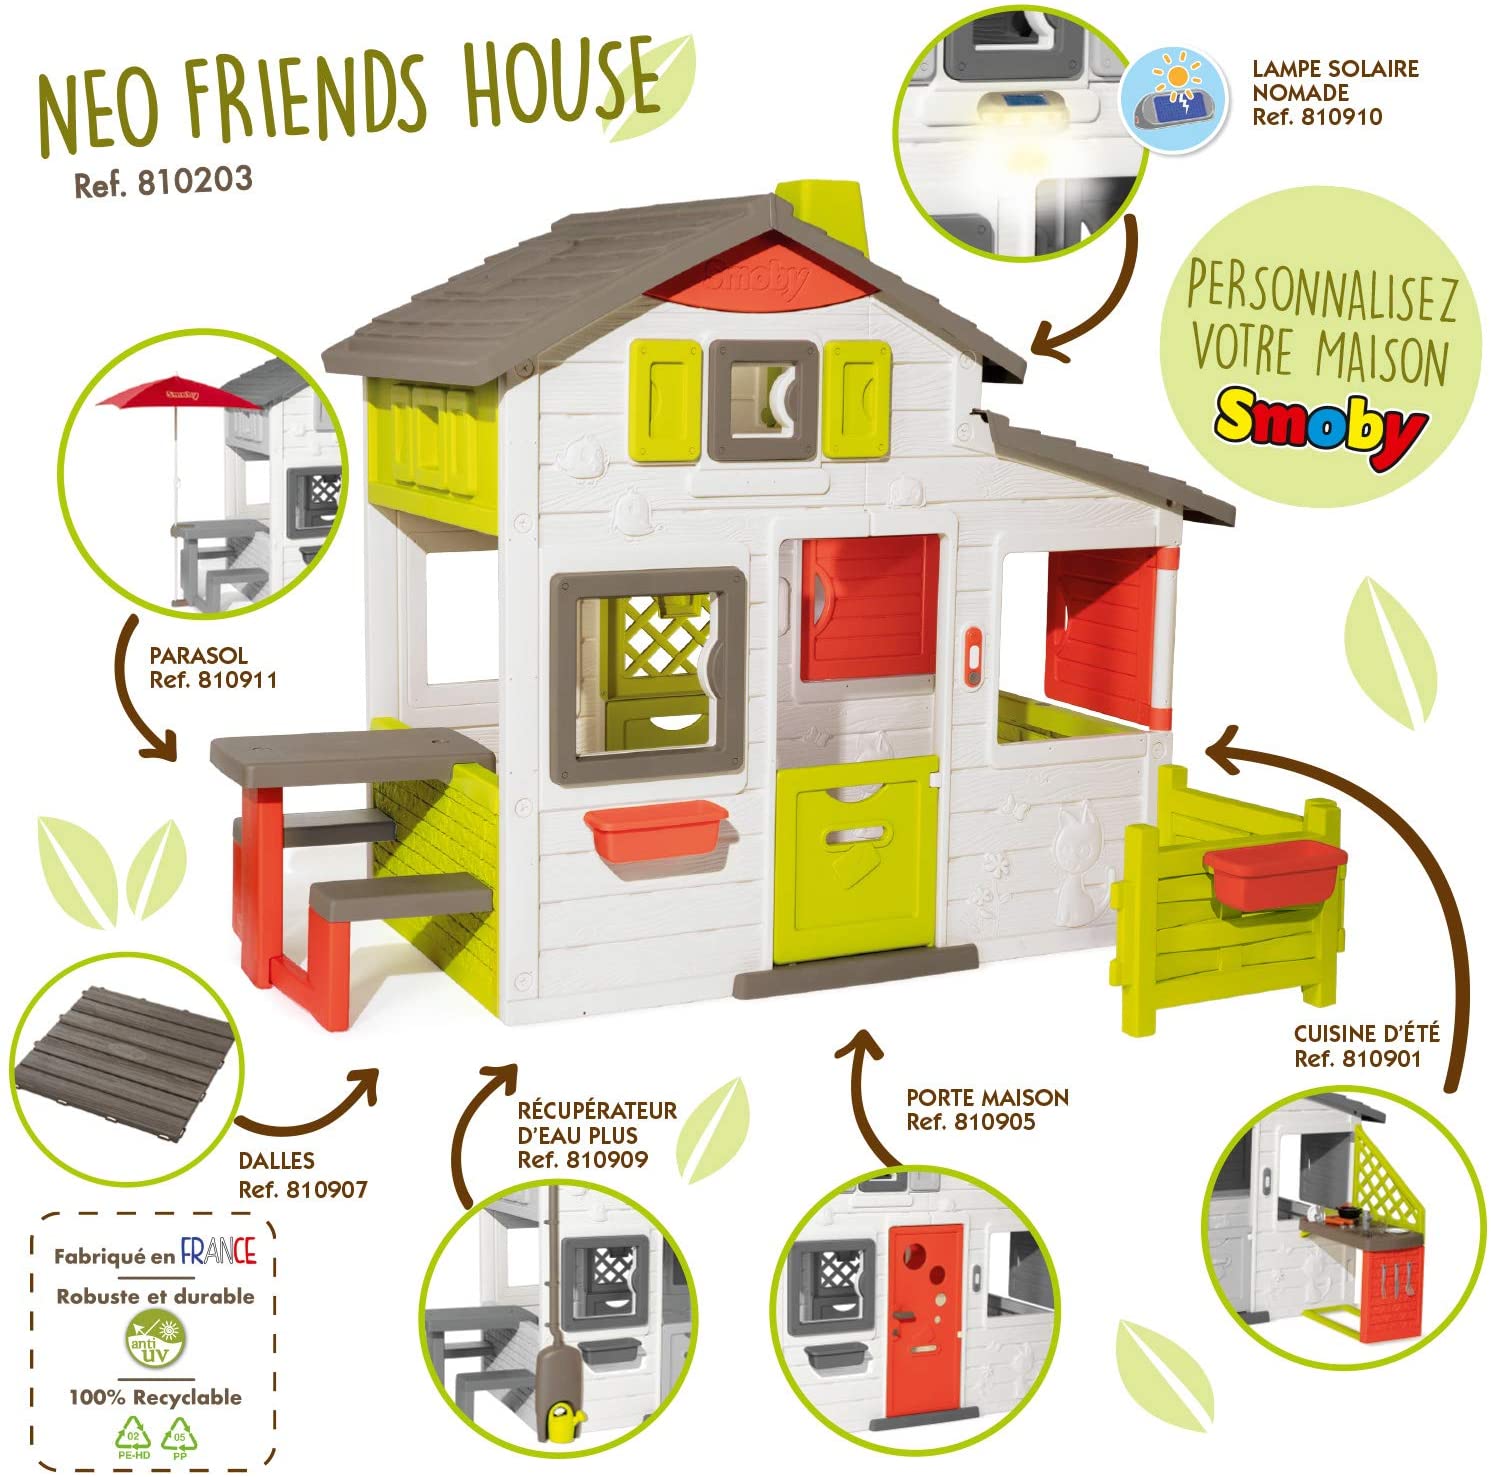 NEO FRIENDS HOUSE 810203